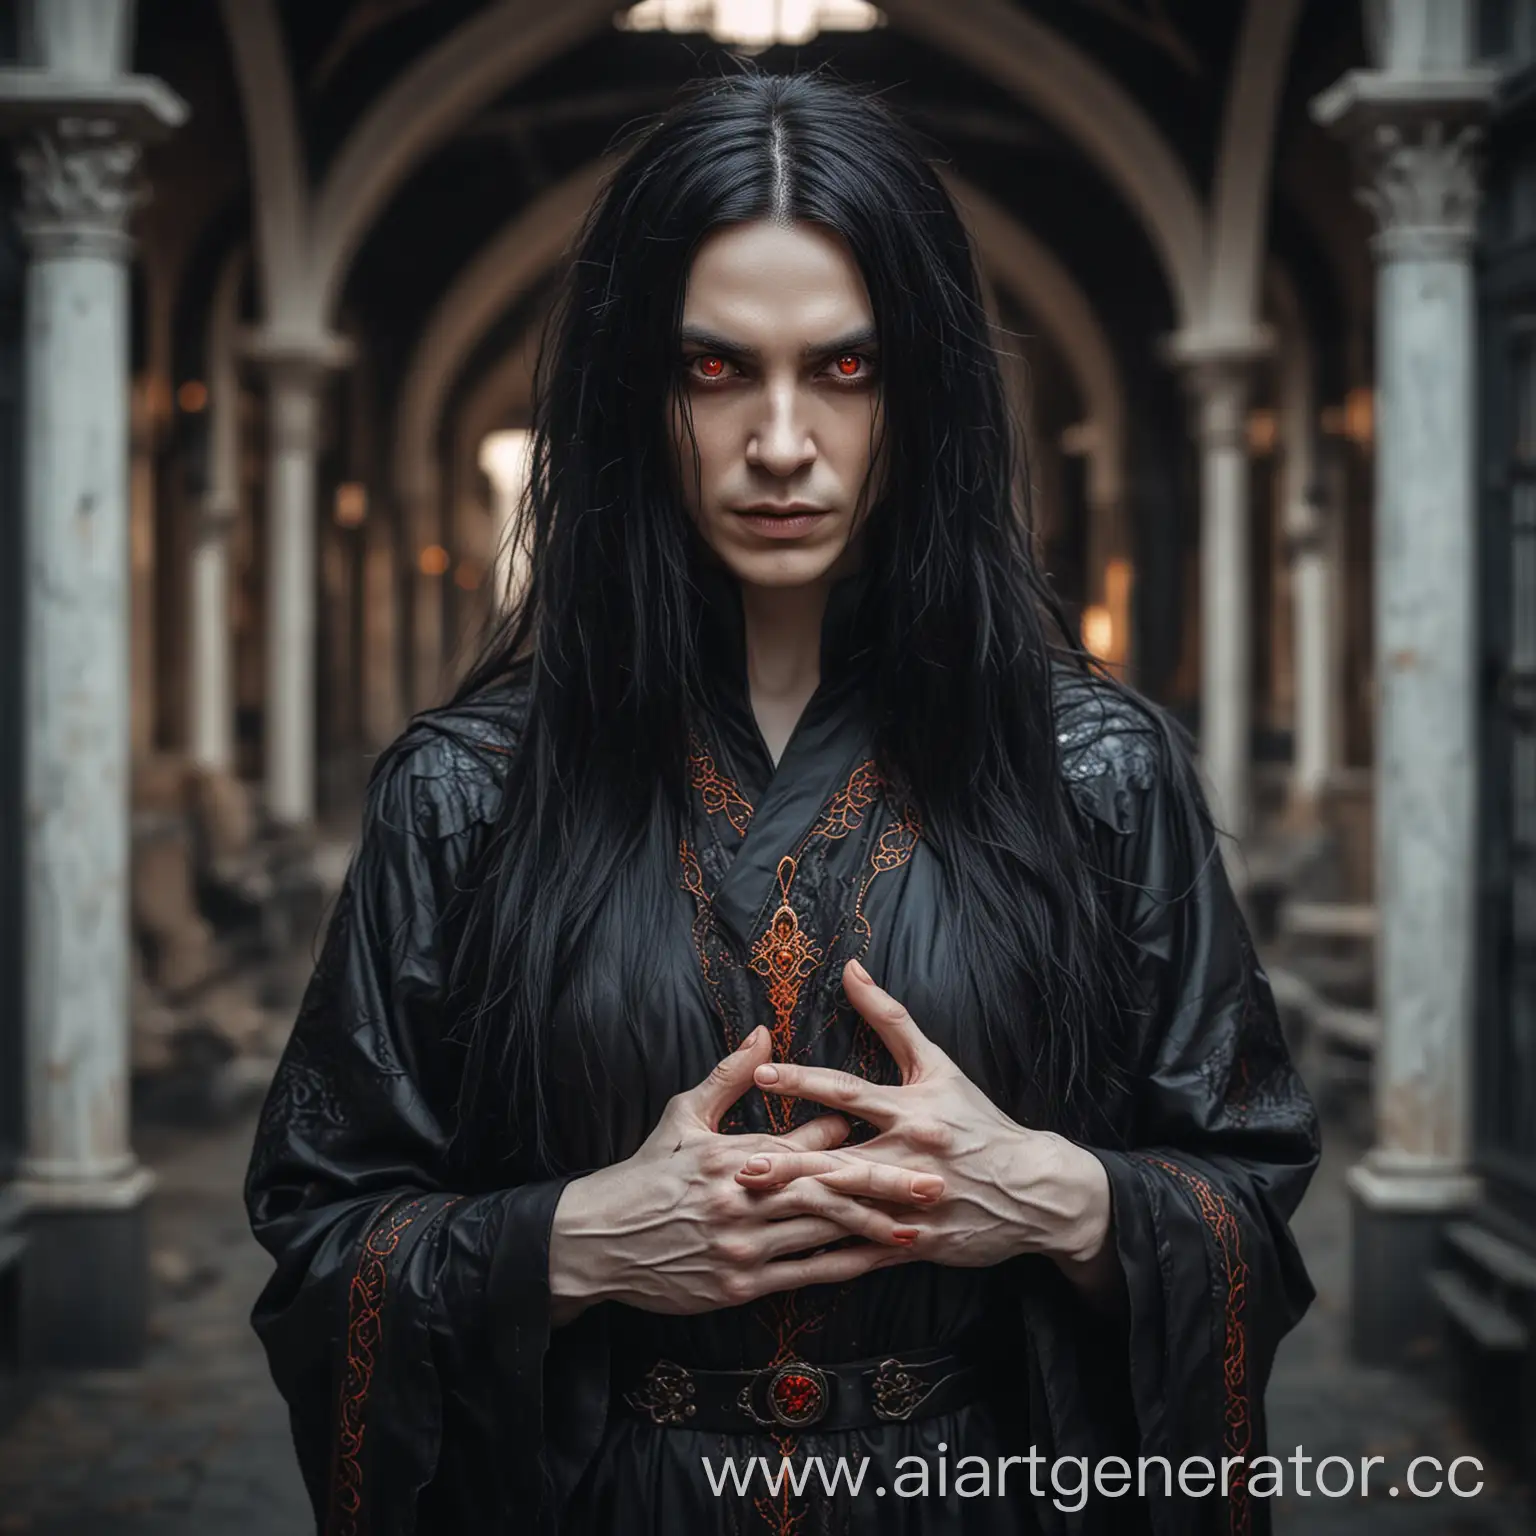 Sinister-Warlock-Portrait-Dark-Fantasy-Character-with-Veins-and-Leather-Robe